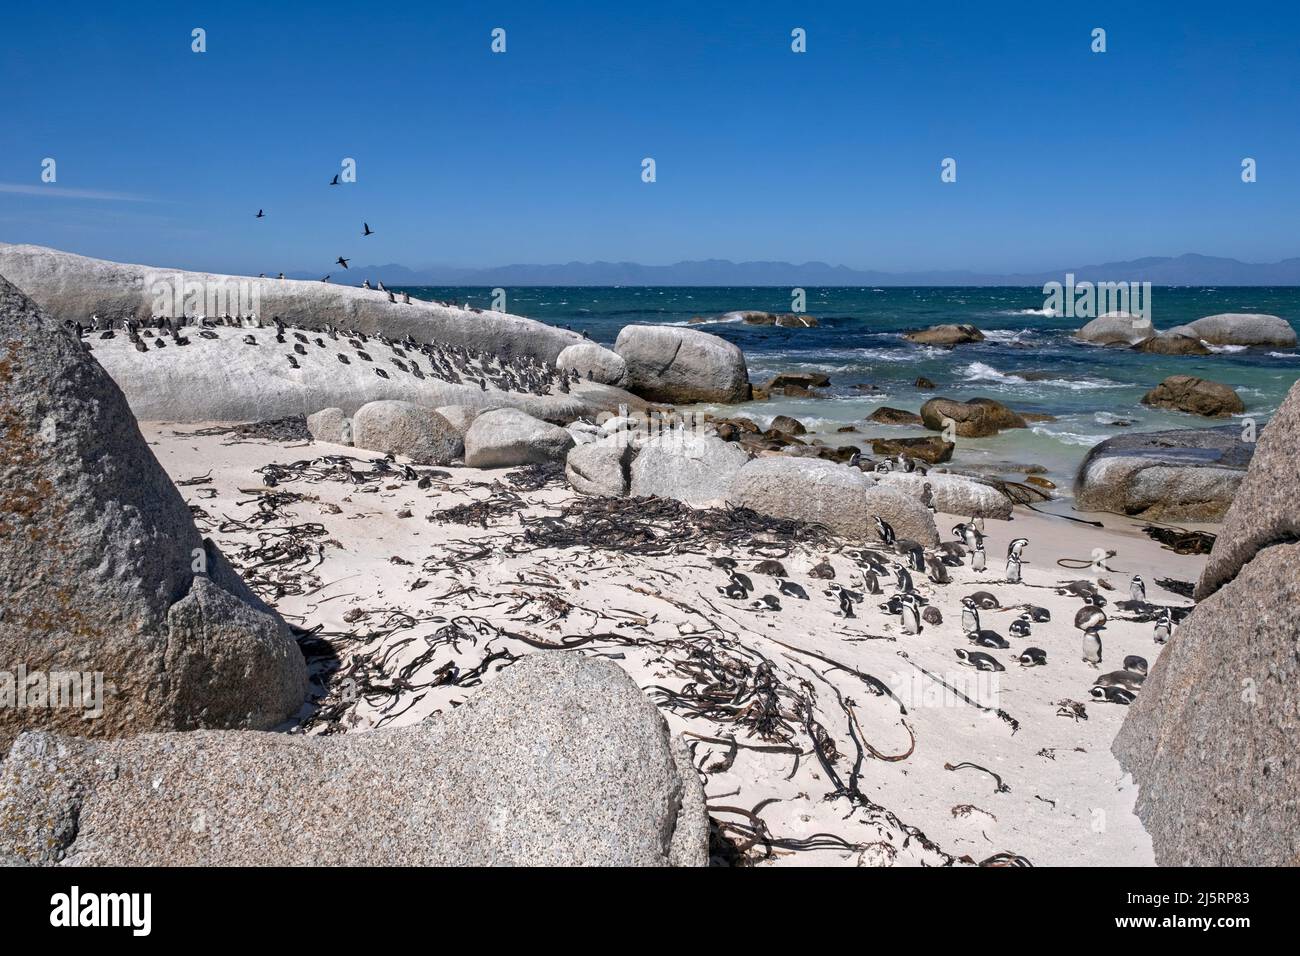 Cape penguins / South African penguin (Spheniscus demersus) colony at Boulders Beach, Simon's Town, Western Cape, South Africa Stock Photo